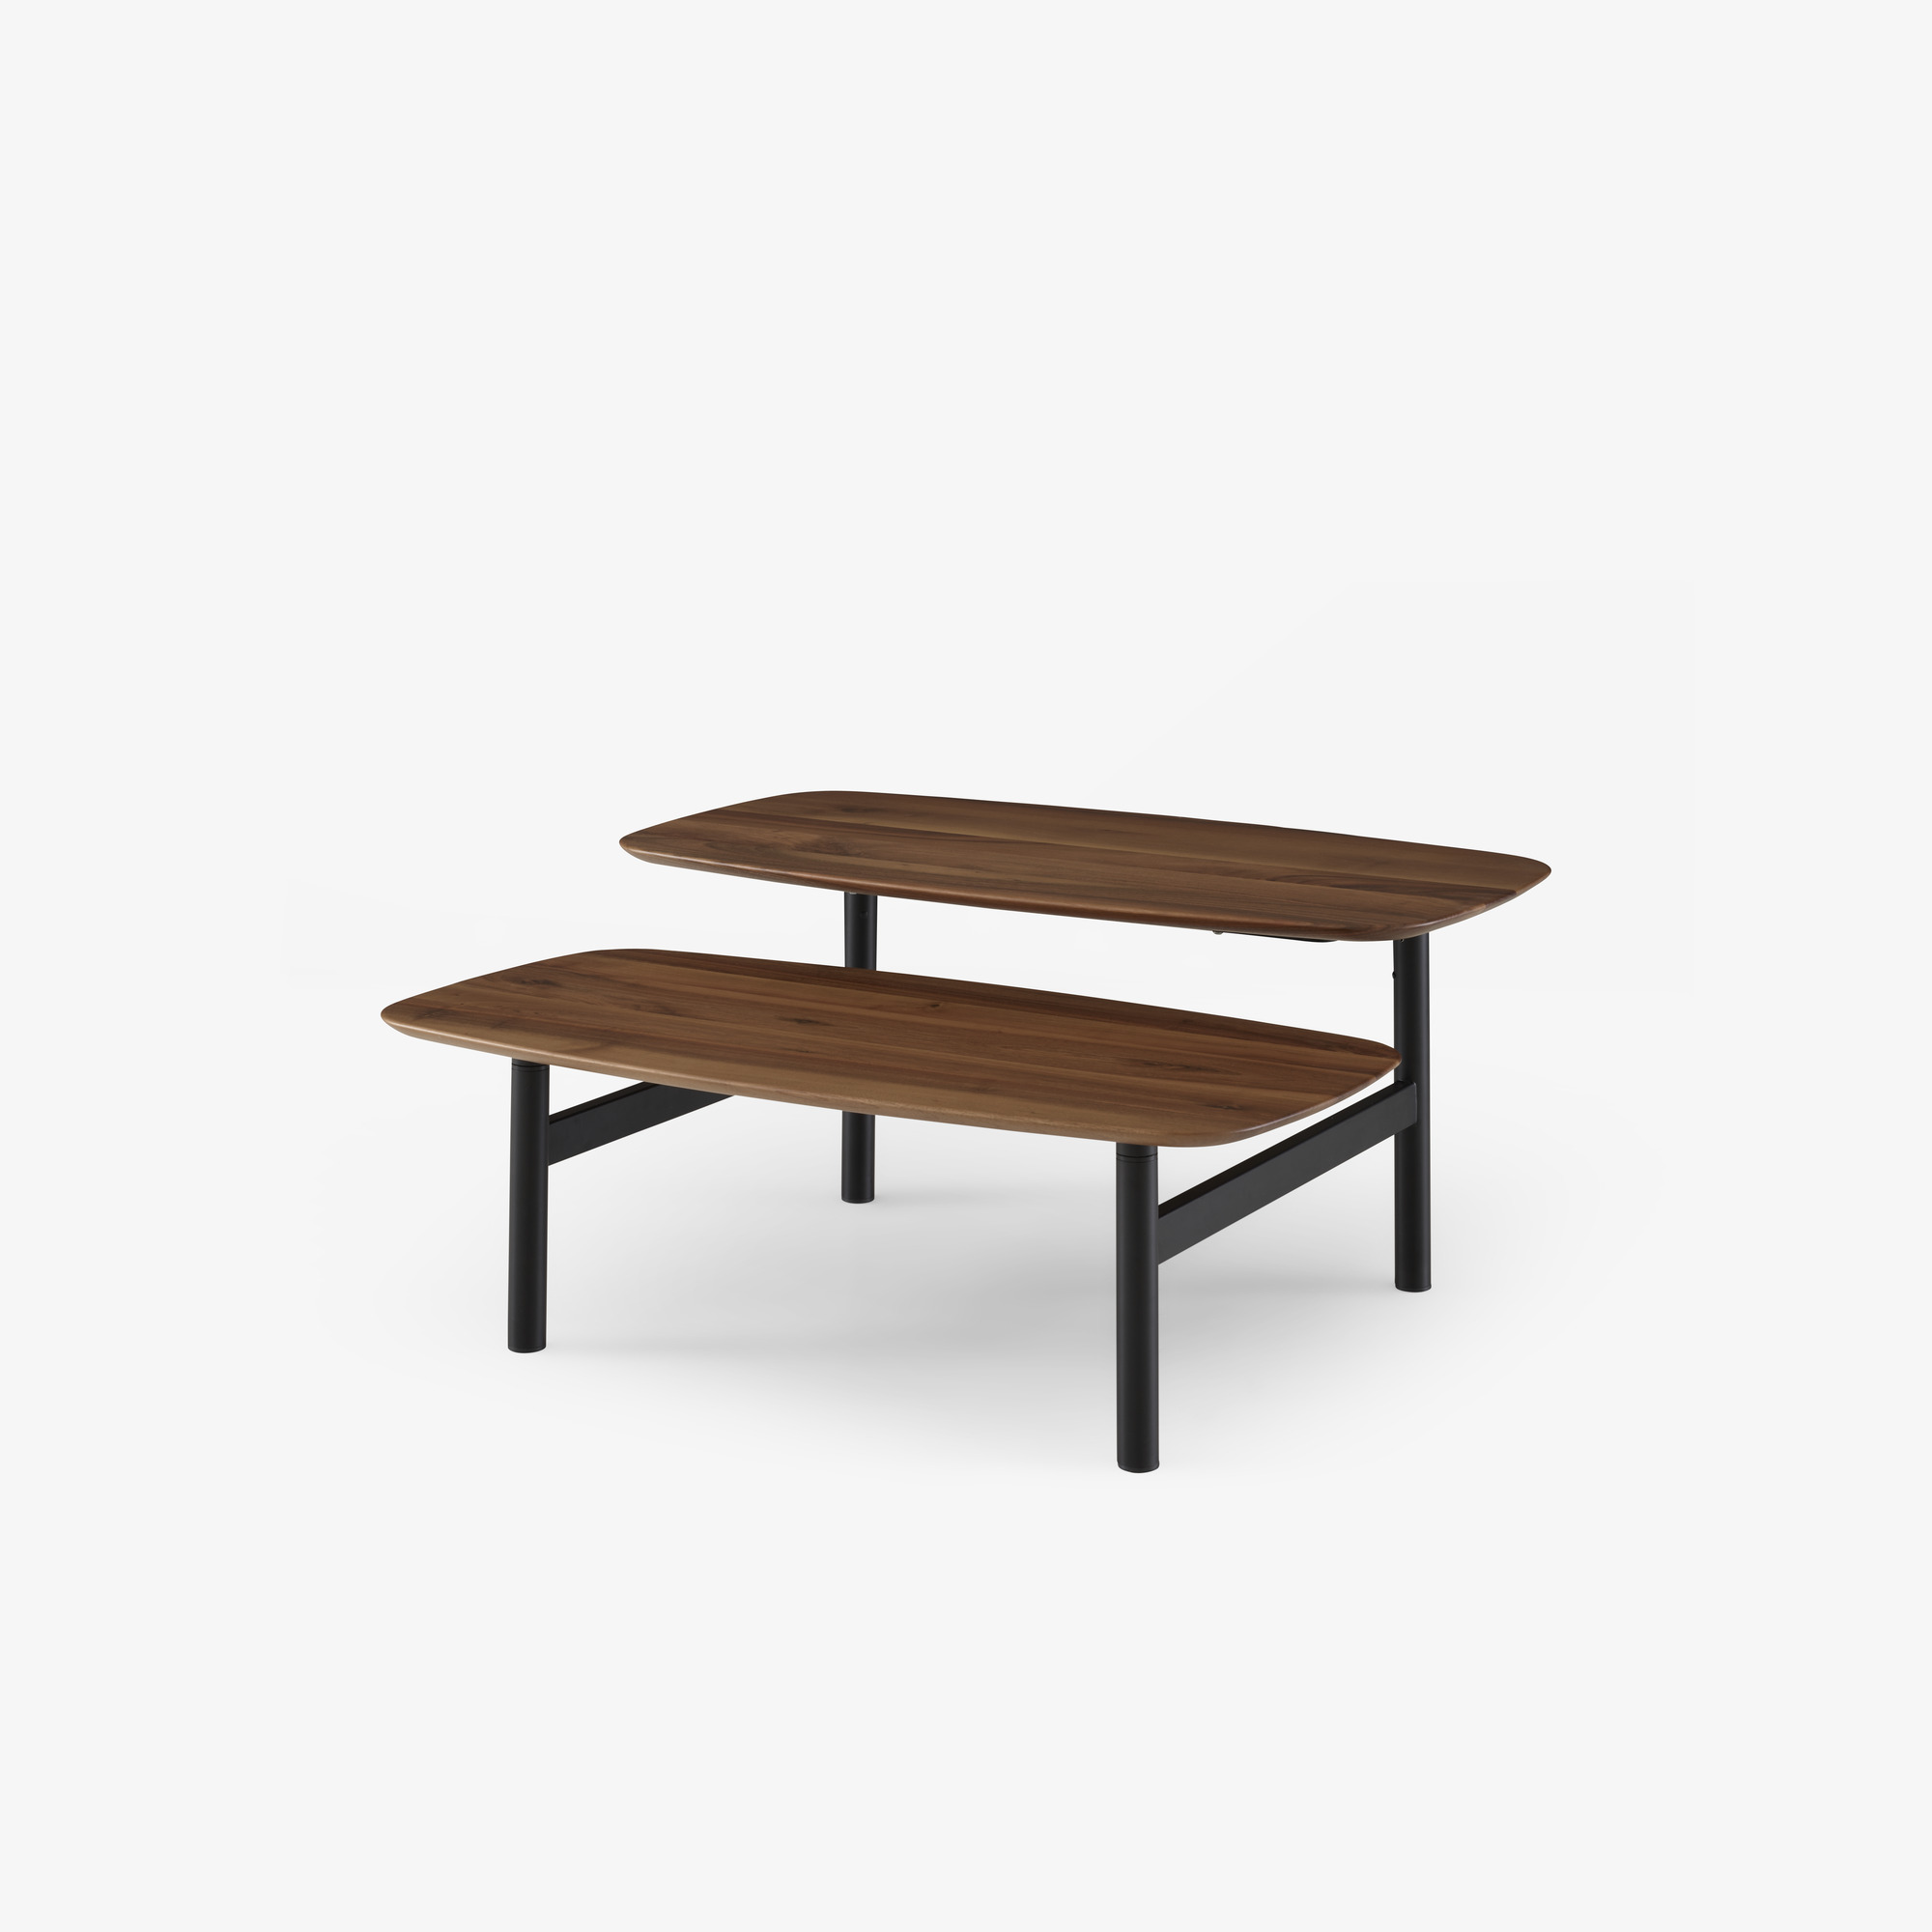 Image Low table european walnut top black lacquered base 4